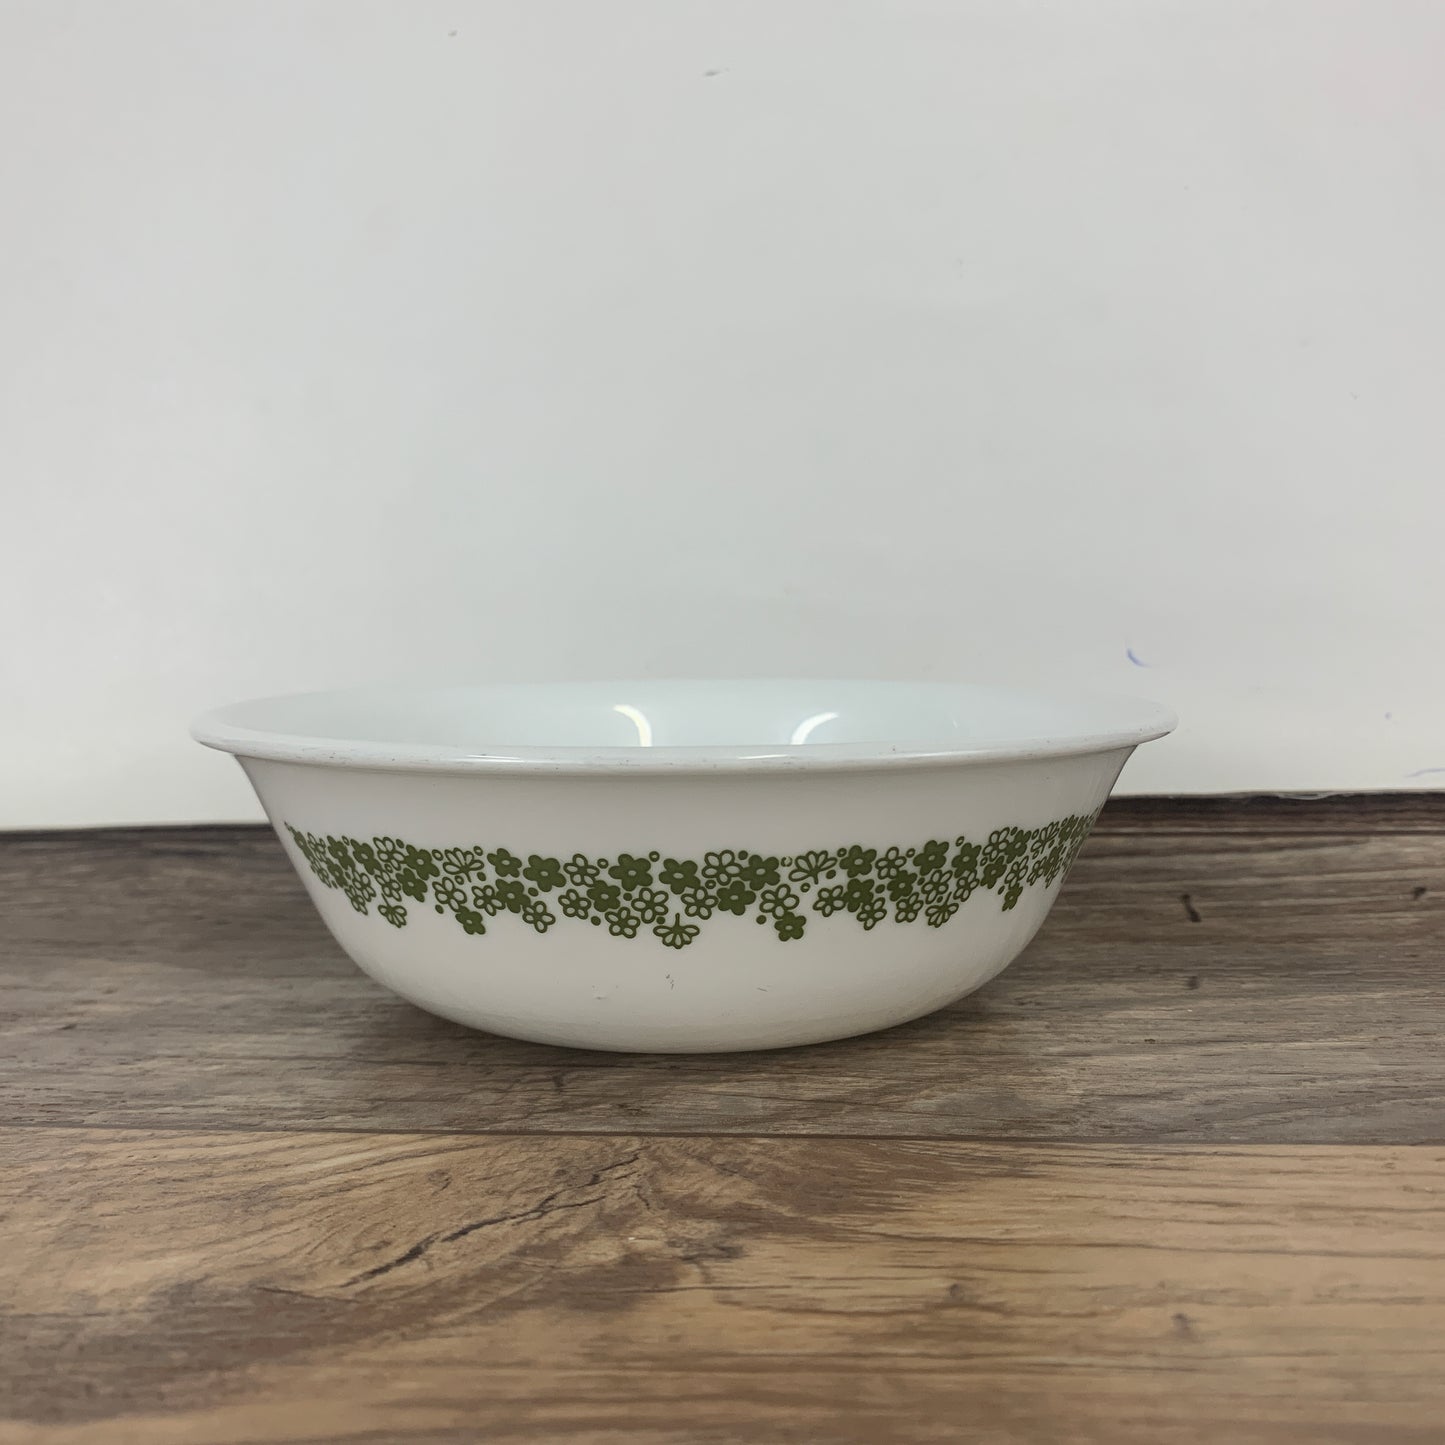 Corelle Spring Blossom Bowls, Crazy Daisy Pattern, Green and White Vintage Cereal Bowls